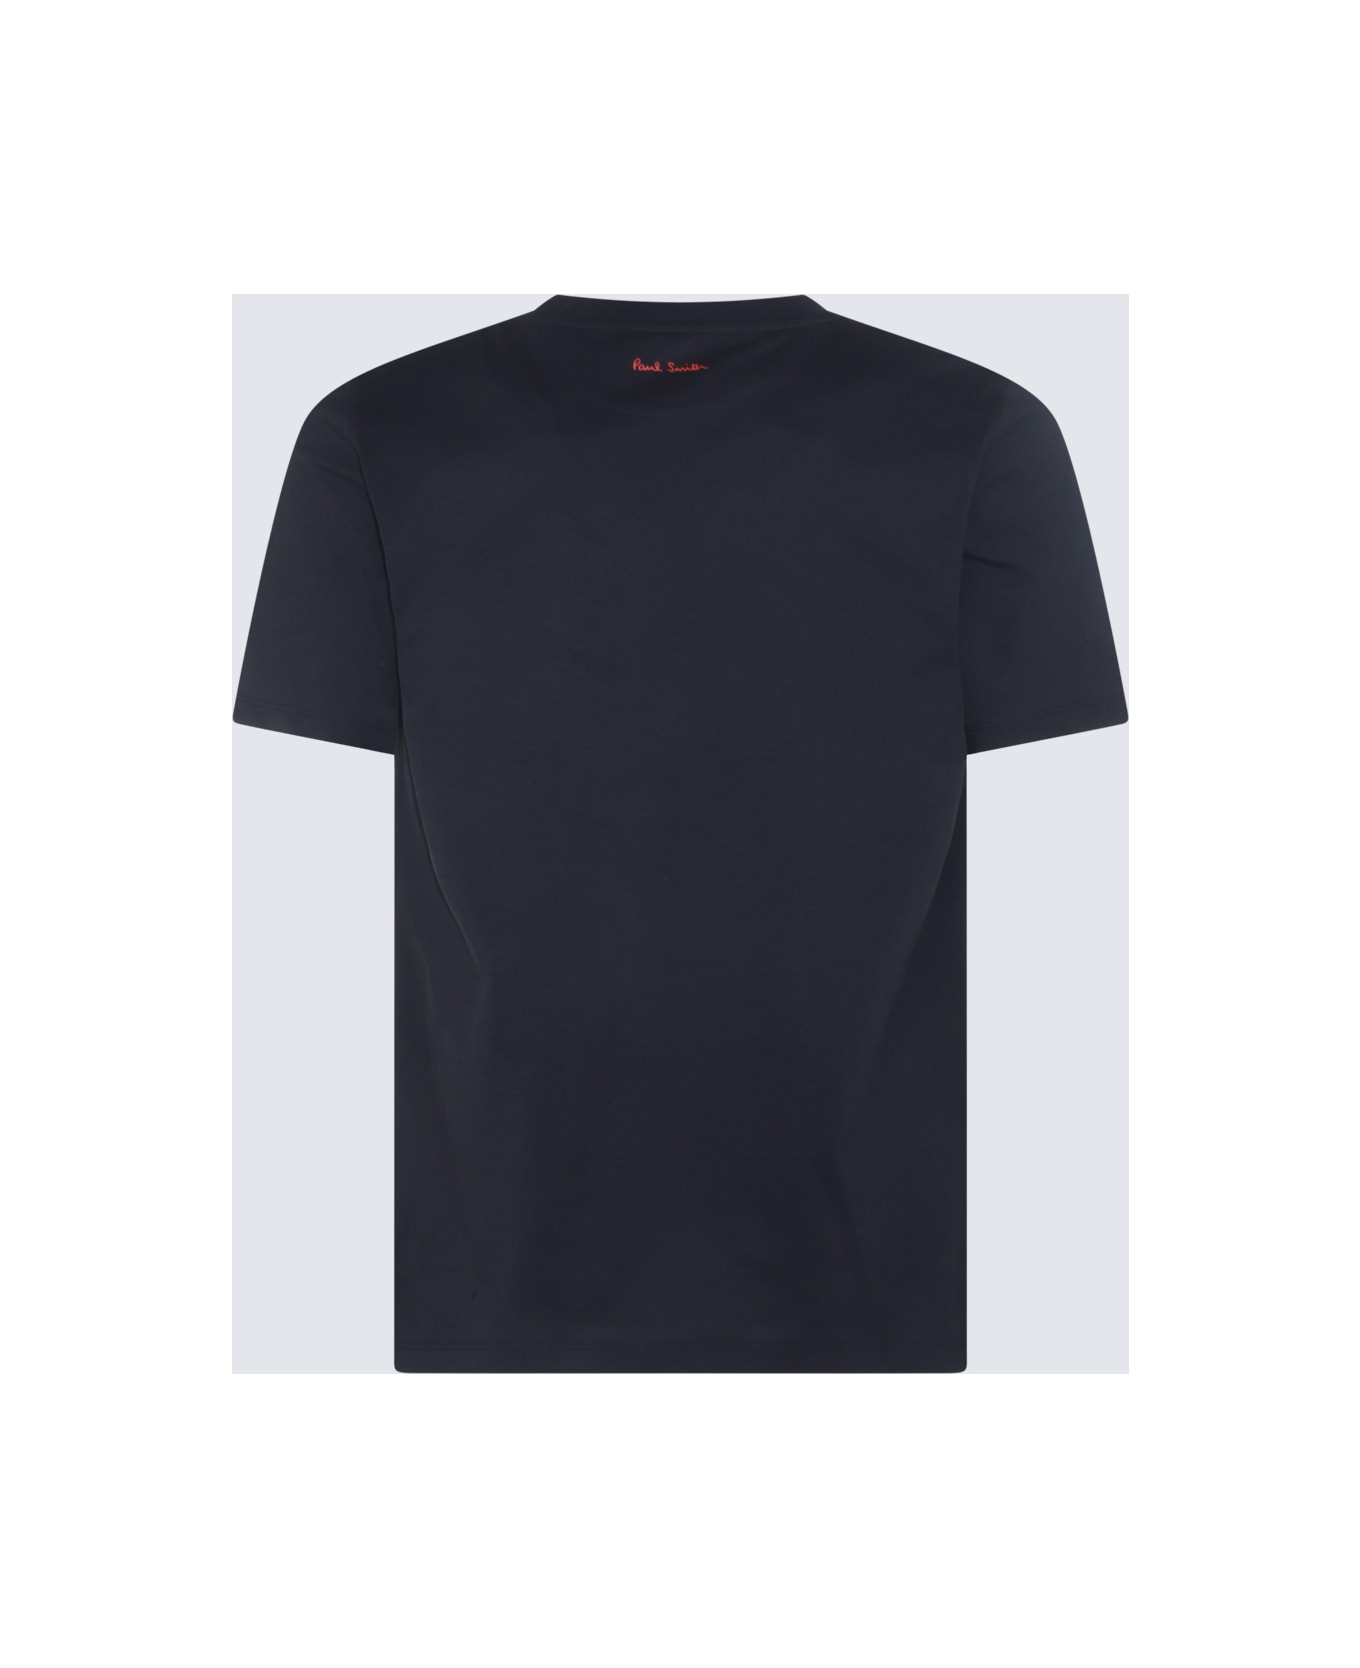 Paul Smith Navy Blue And Red Cotton T-shirt - Blue シャツ